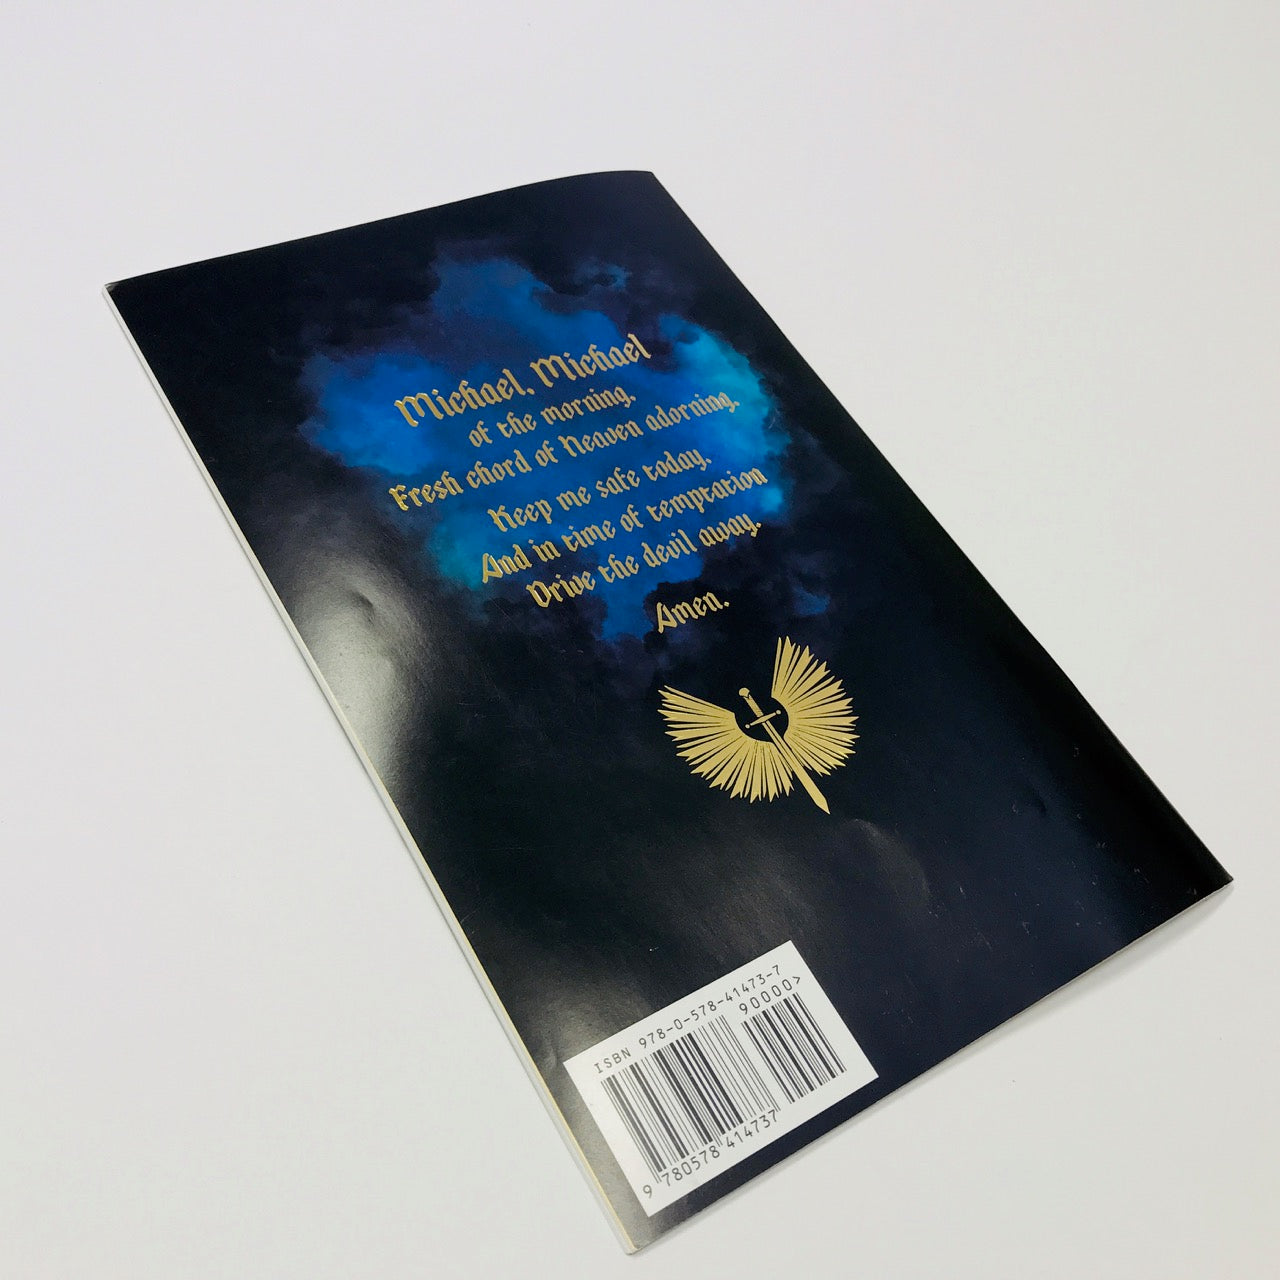 70 Pack of Saint Michael Above the 38th Parallel Comic Book (Gold Edition)